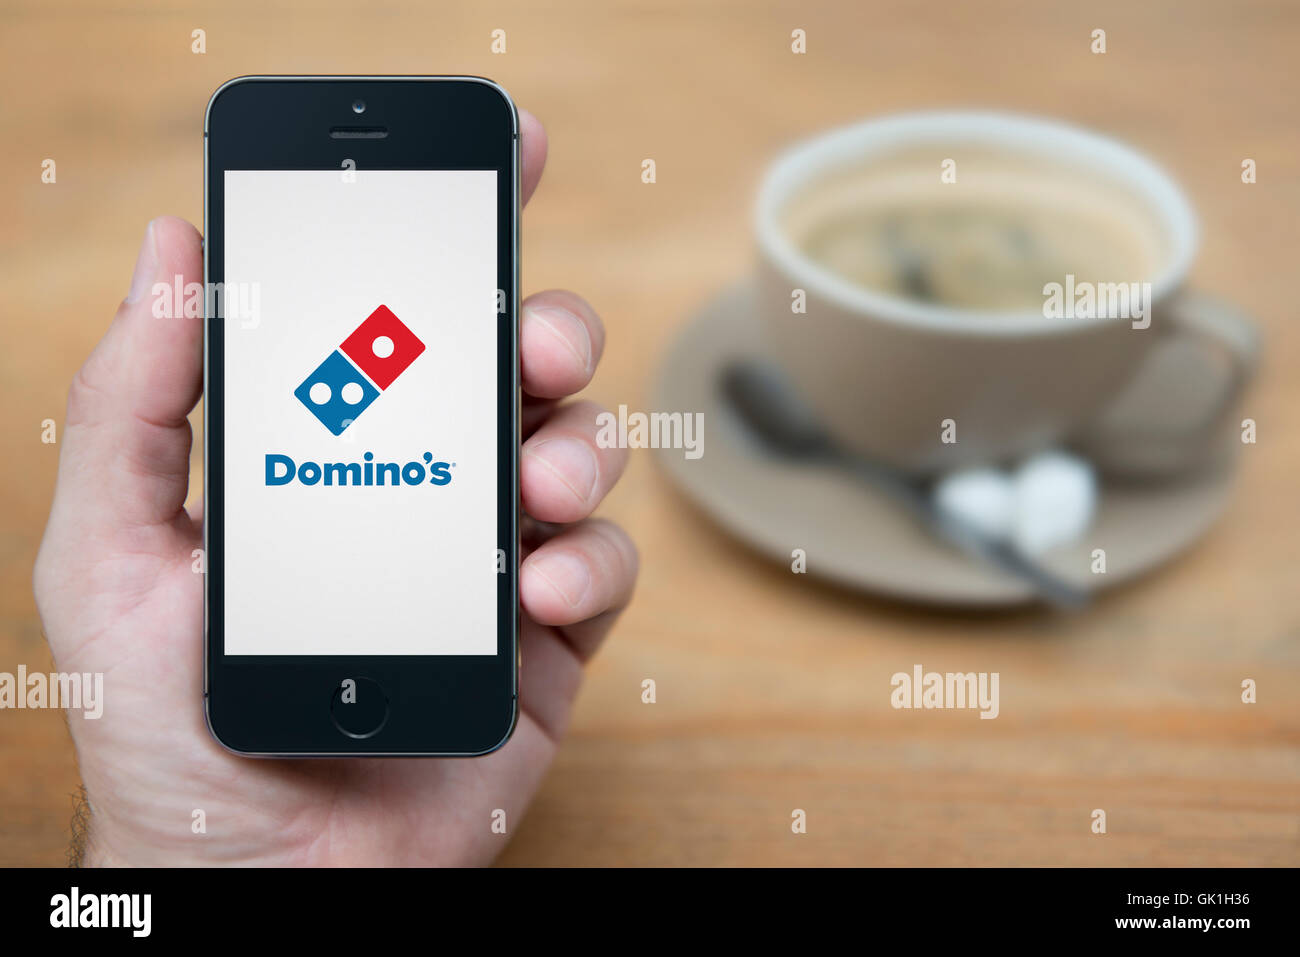 A man looks at his iPhone which displays the Domino's logo, while sat with a cup of coffee (Editorial use only). Stock Photo